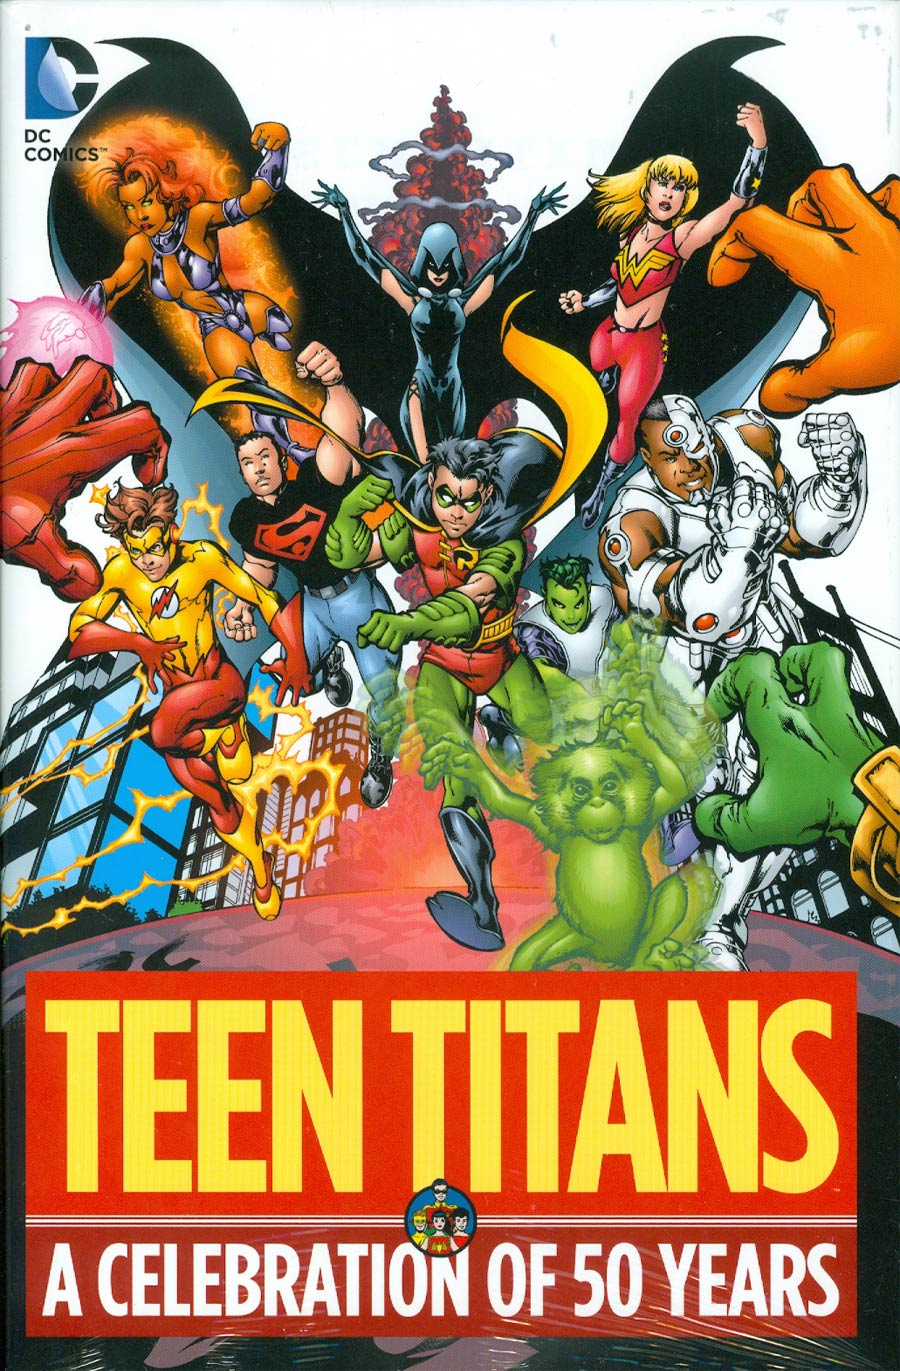 Teen Titans A Celebration Of 50 Years HC